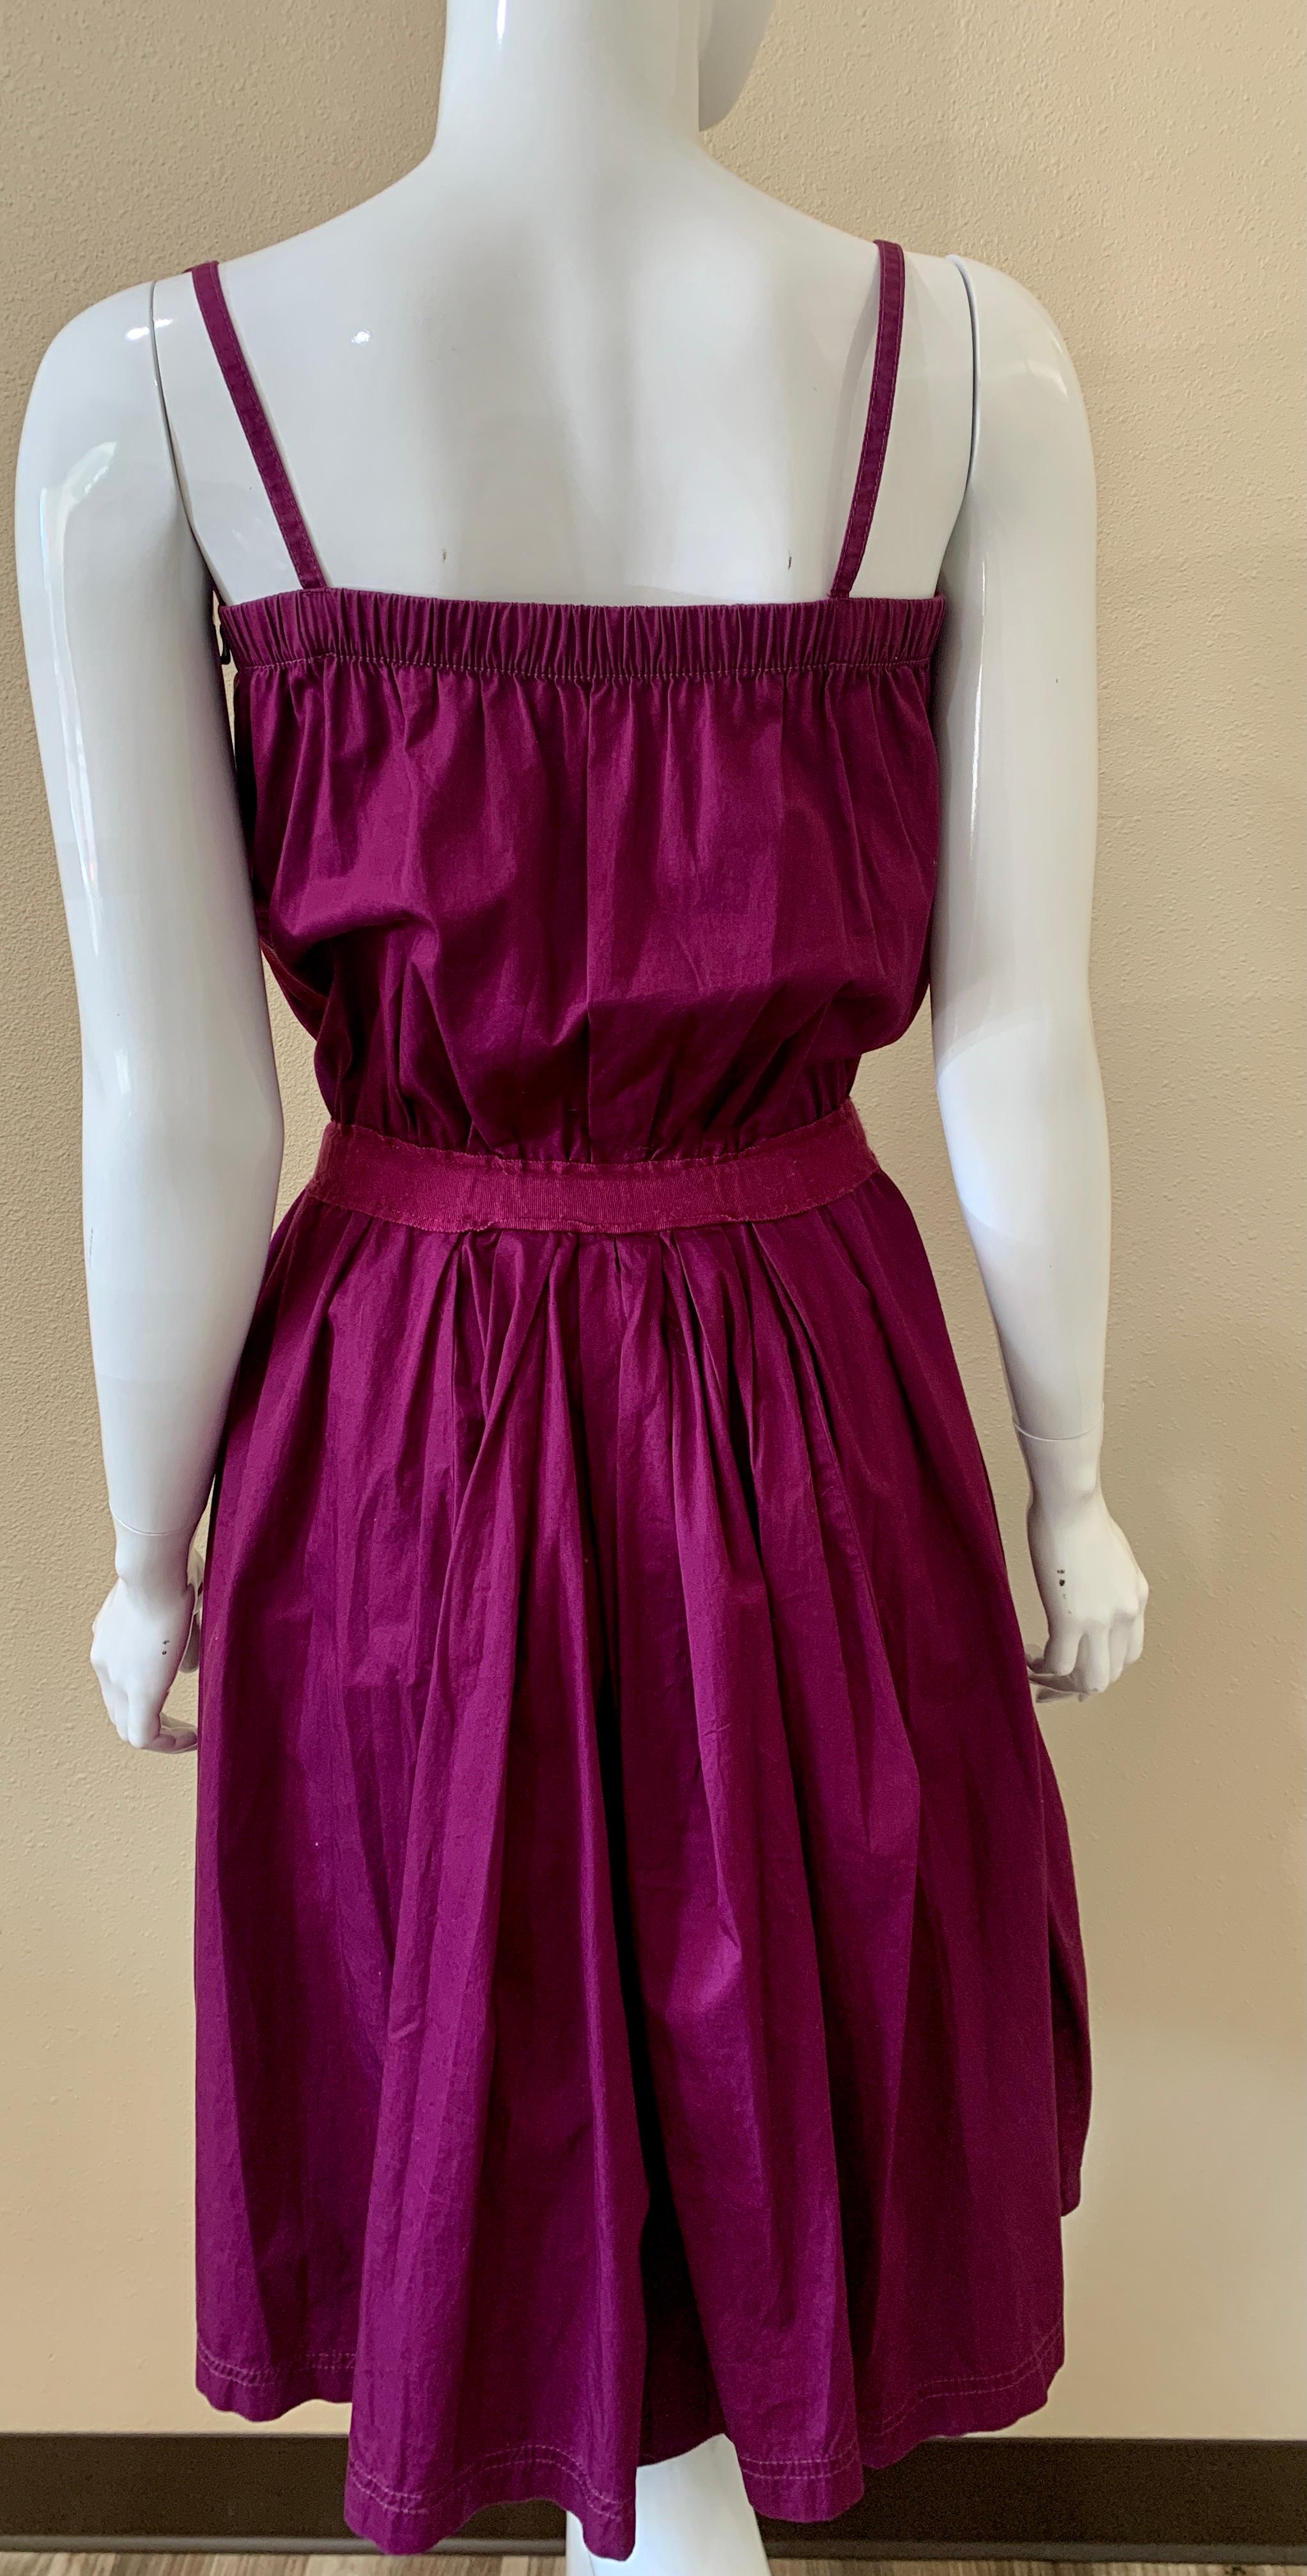 Cotton Purple Lanvin Day Dress that has a flower embellishment with a belt. Hits at the knee, vintage feel. Perfect for spring / summer days. Figure Flattering with gathering at the waist and chest. In good, but vintage condition. 

Size 42 but fits